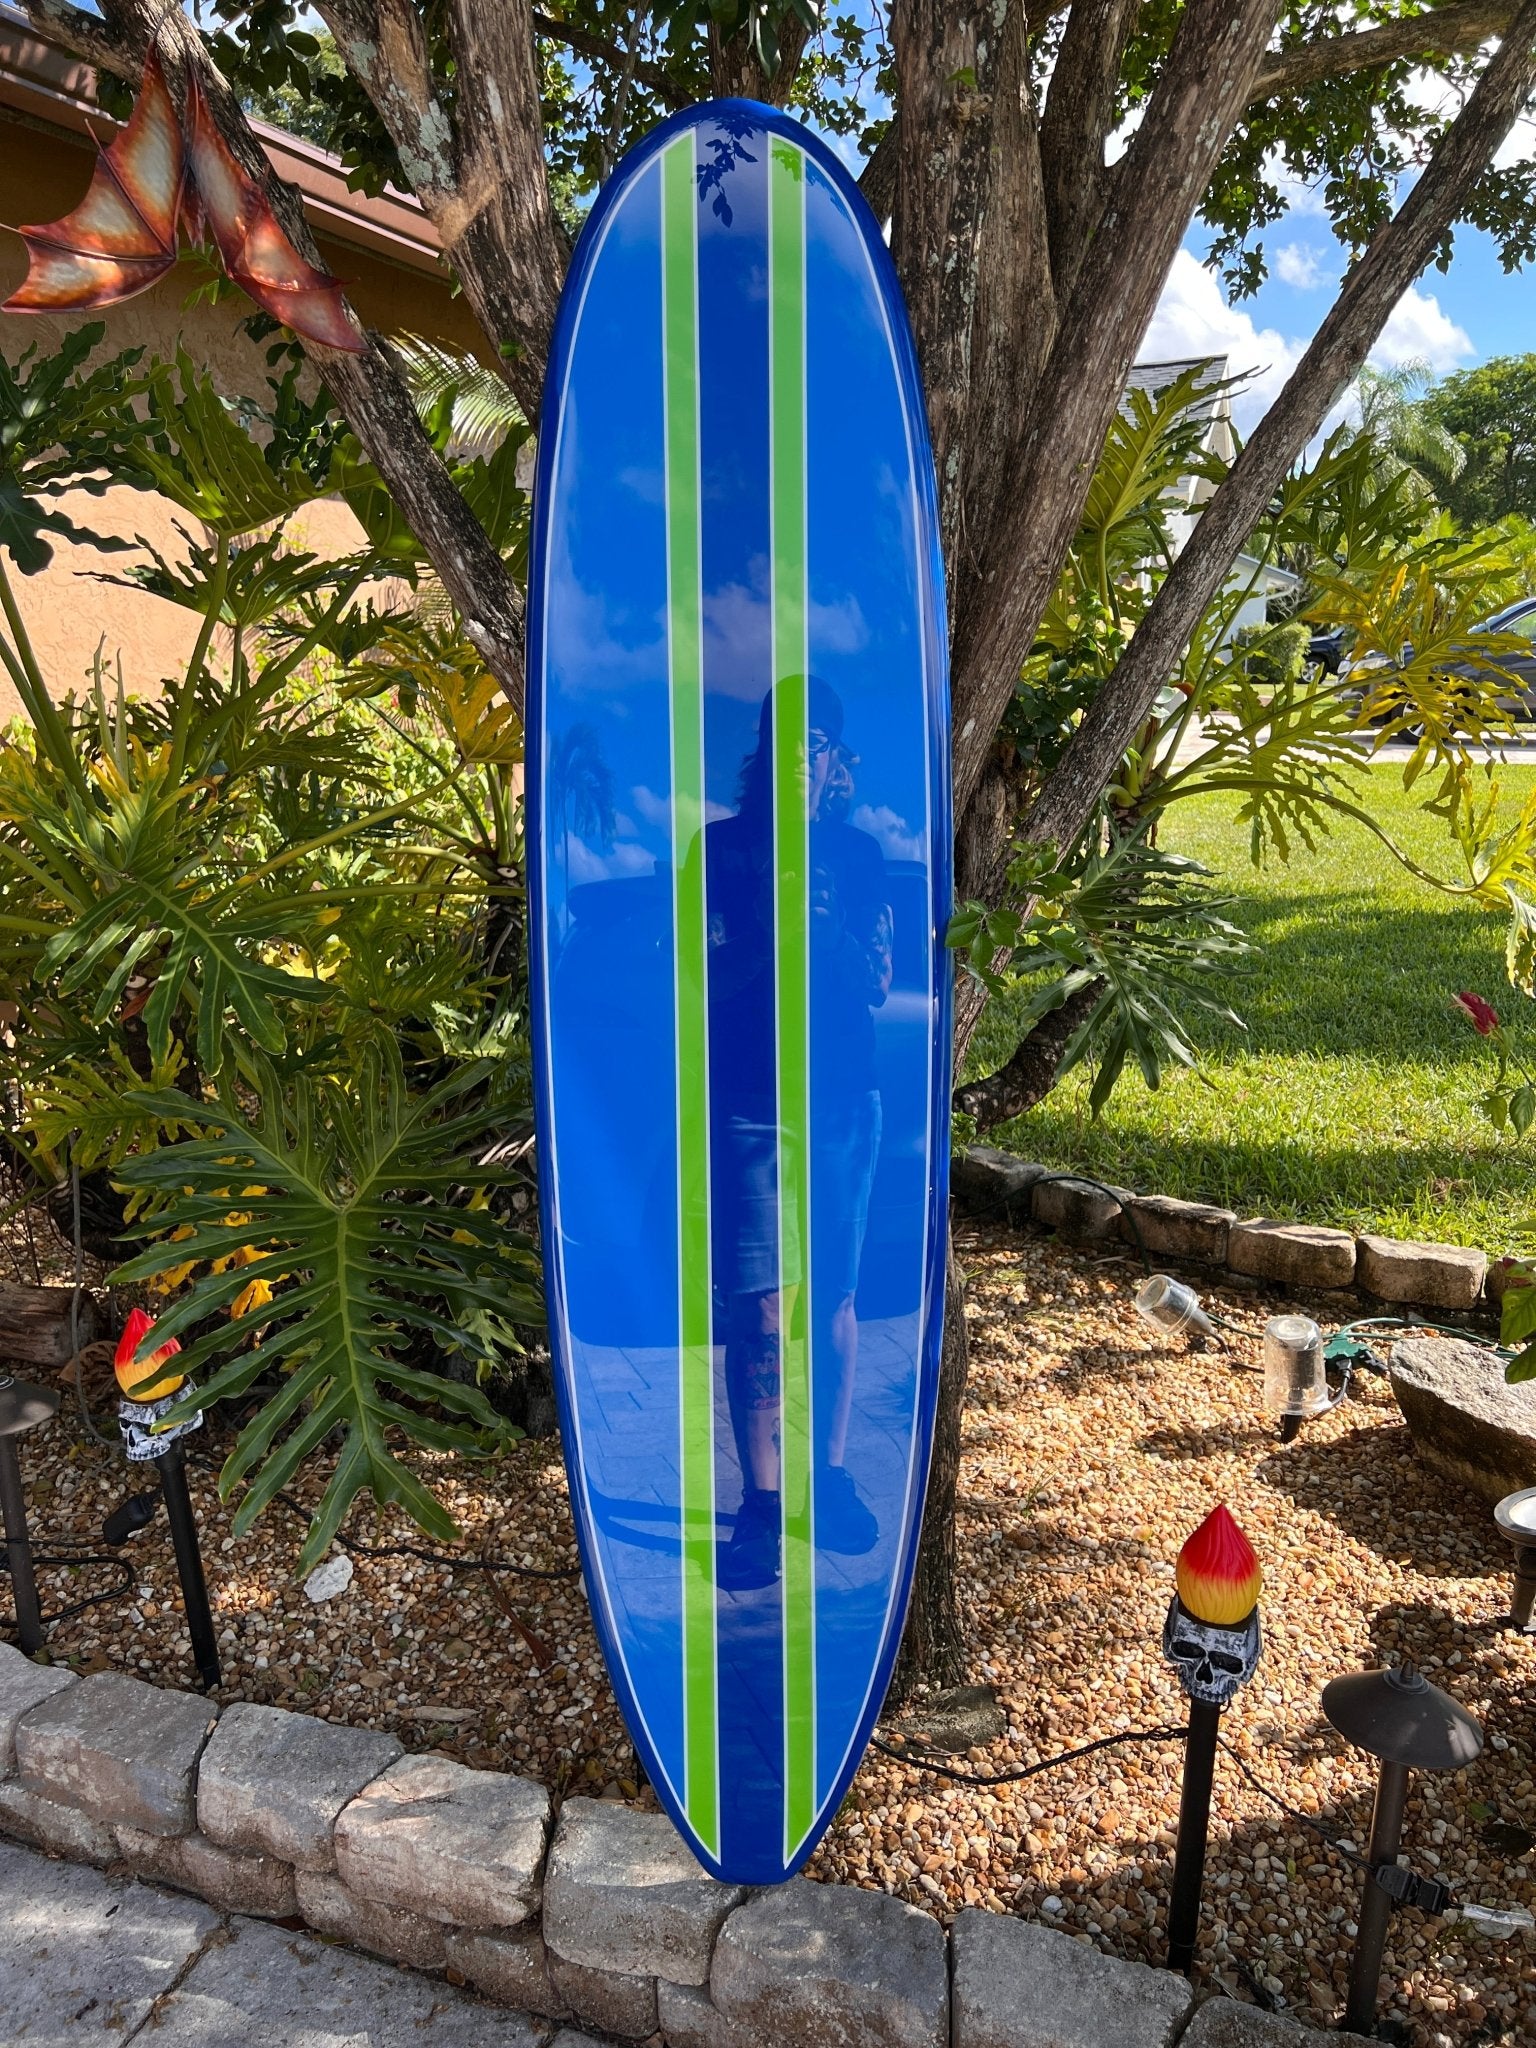 Handcrafted Decorative Surfboard Decor Gallery  Tiki Soul Surfboards made  from the highest quality materials. We never us plywood here!